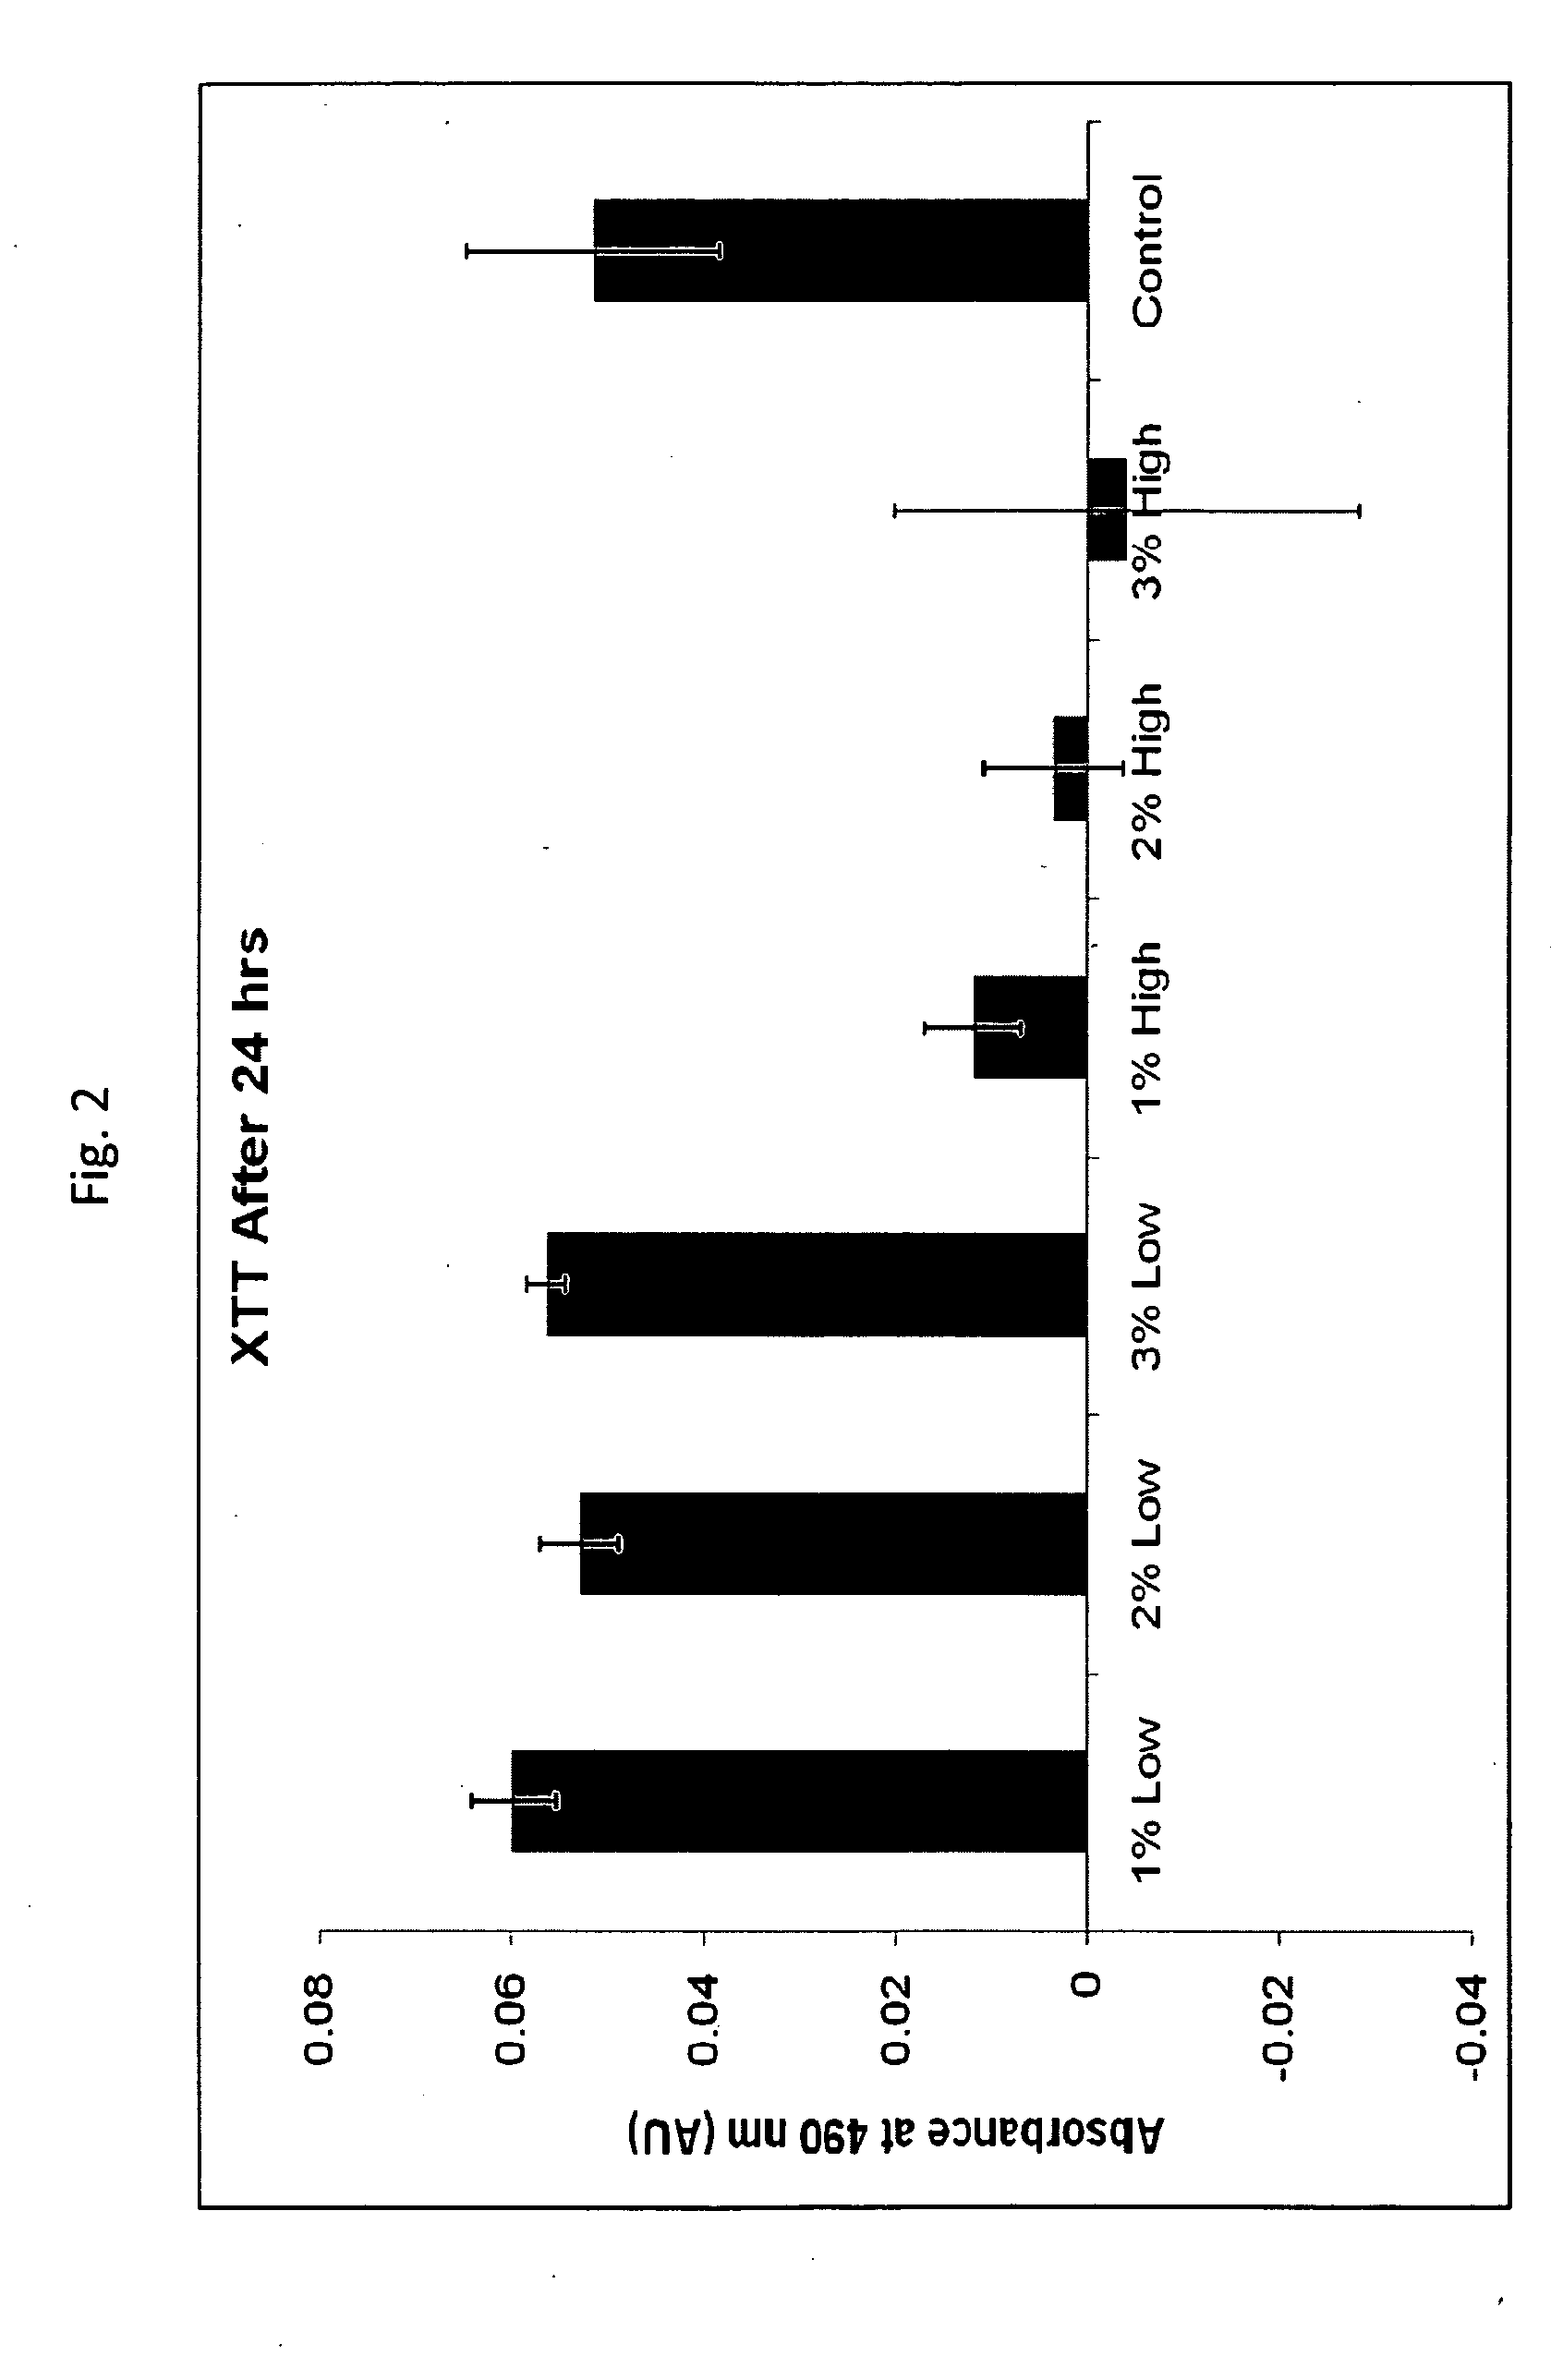 Method for Removing Endotoxin from Proteins